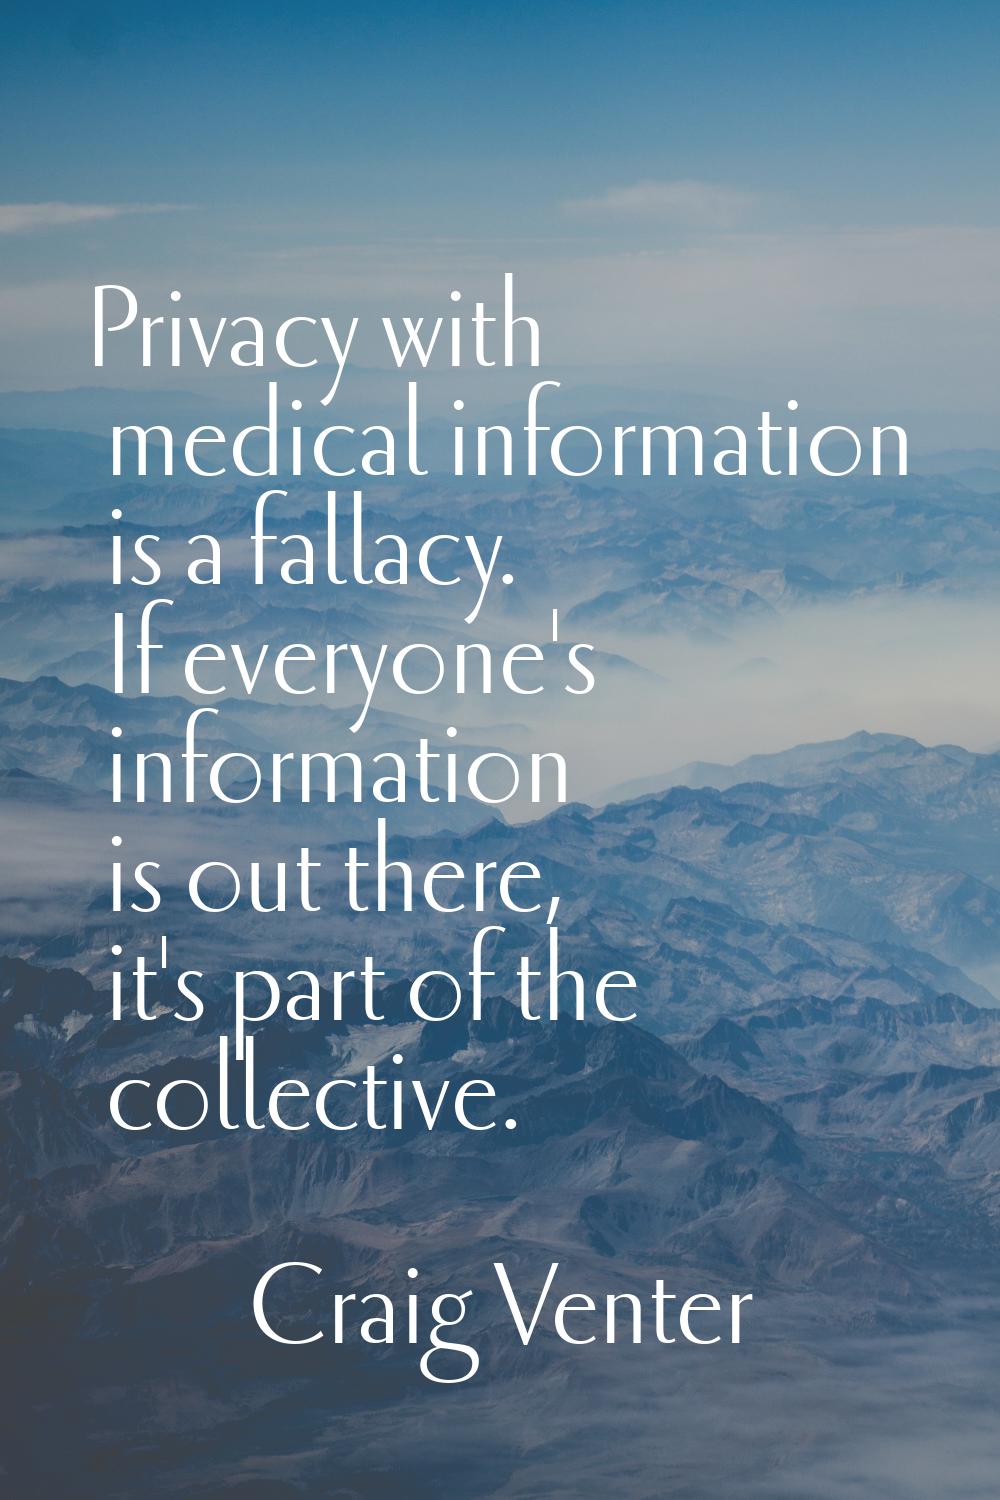 Privacy with medical information is a fallacy. If everyone's information is out there, it's part of